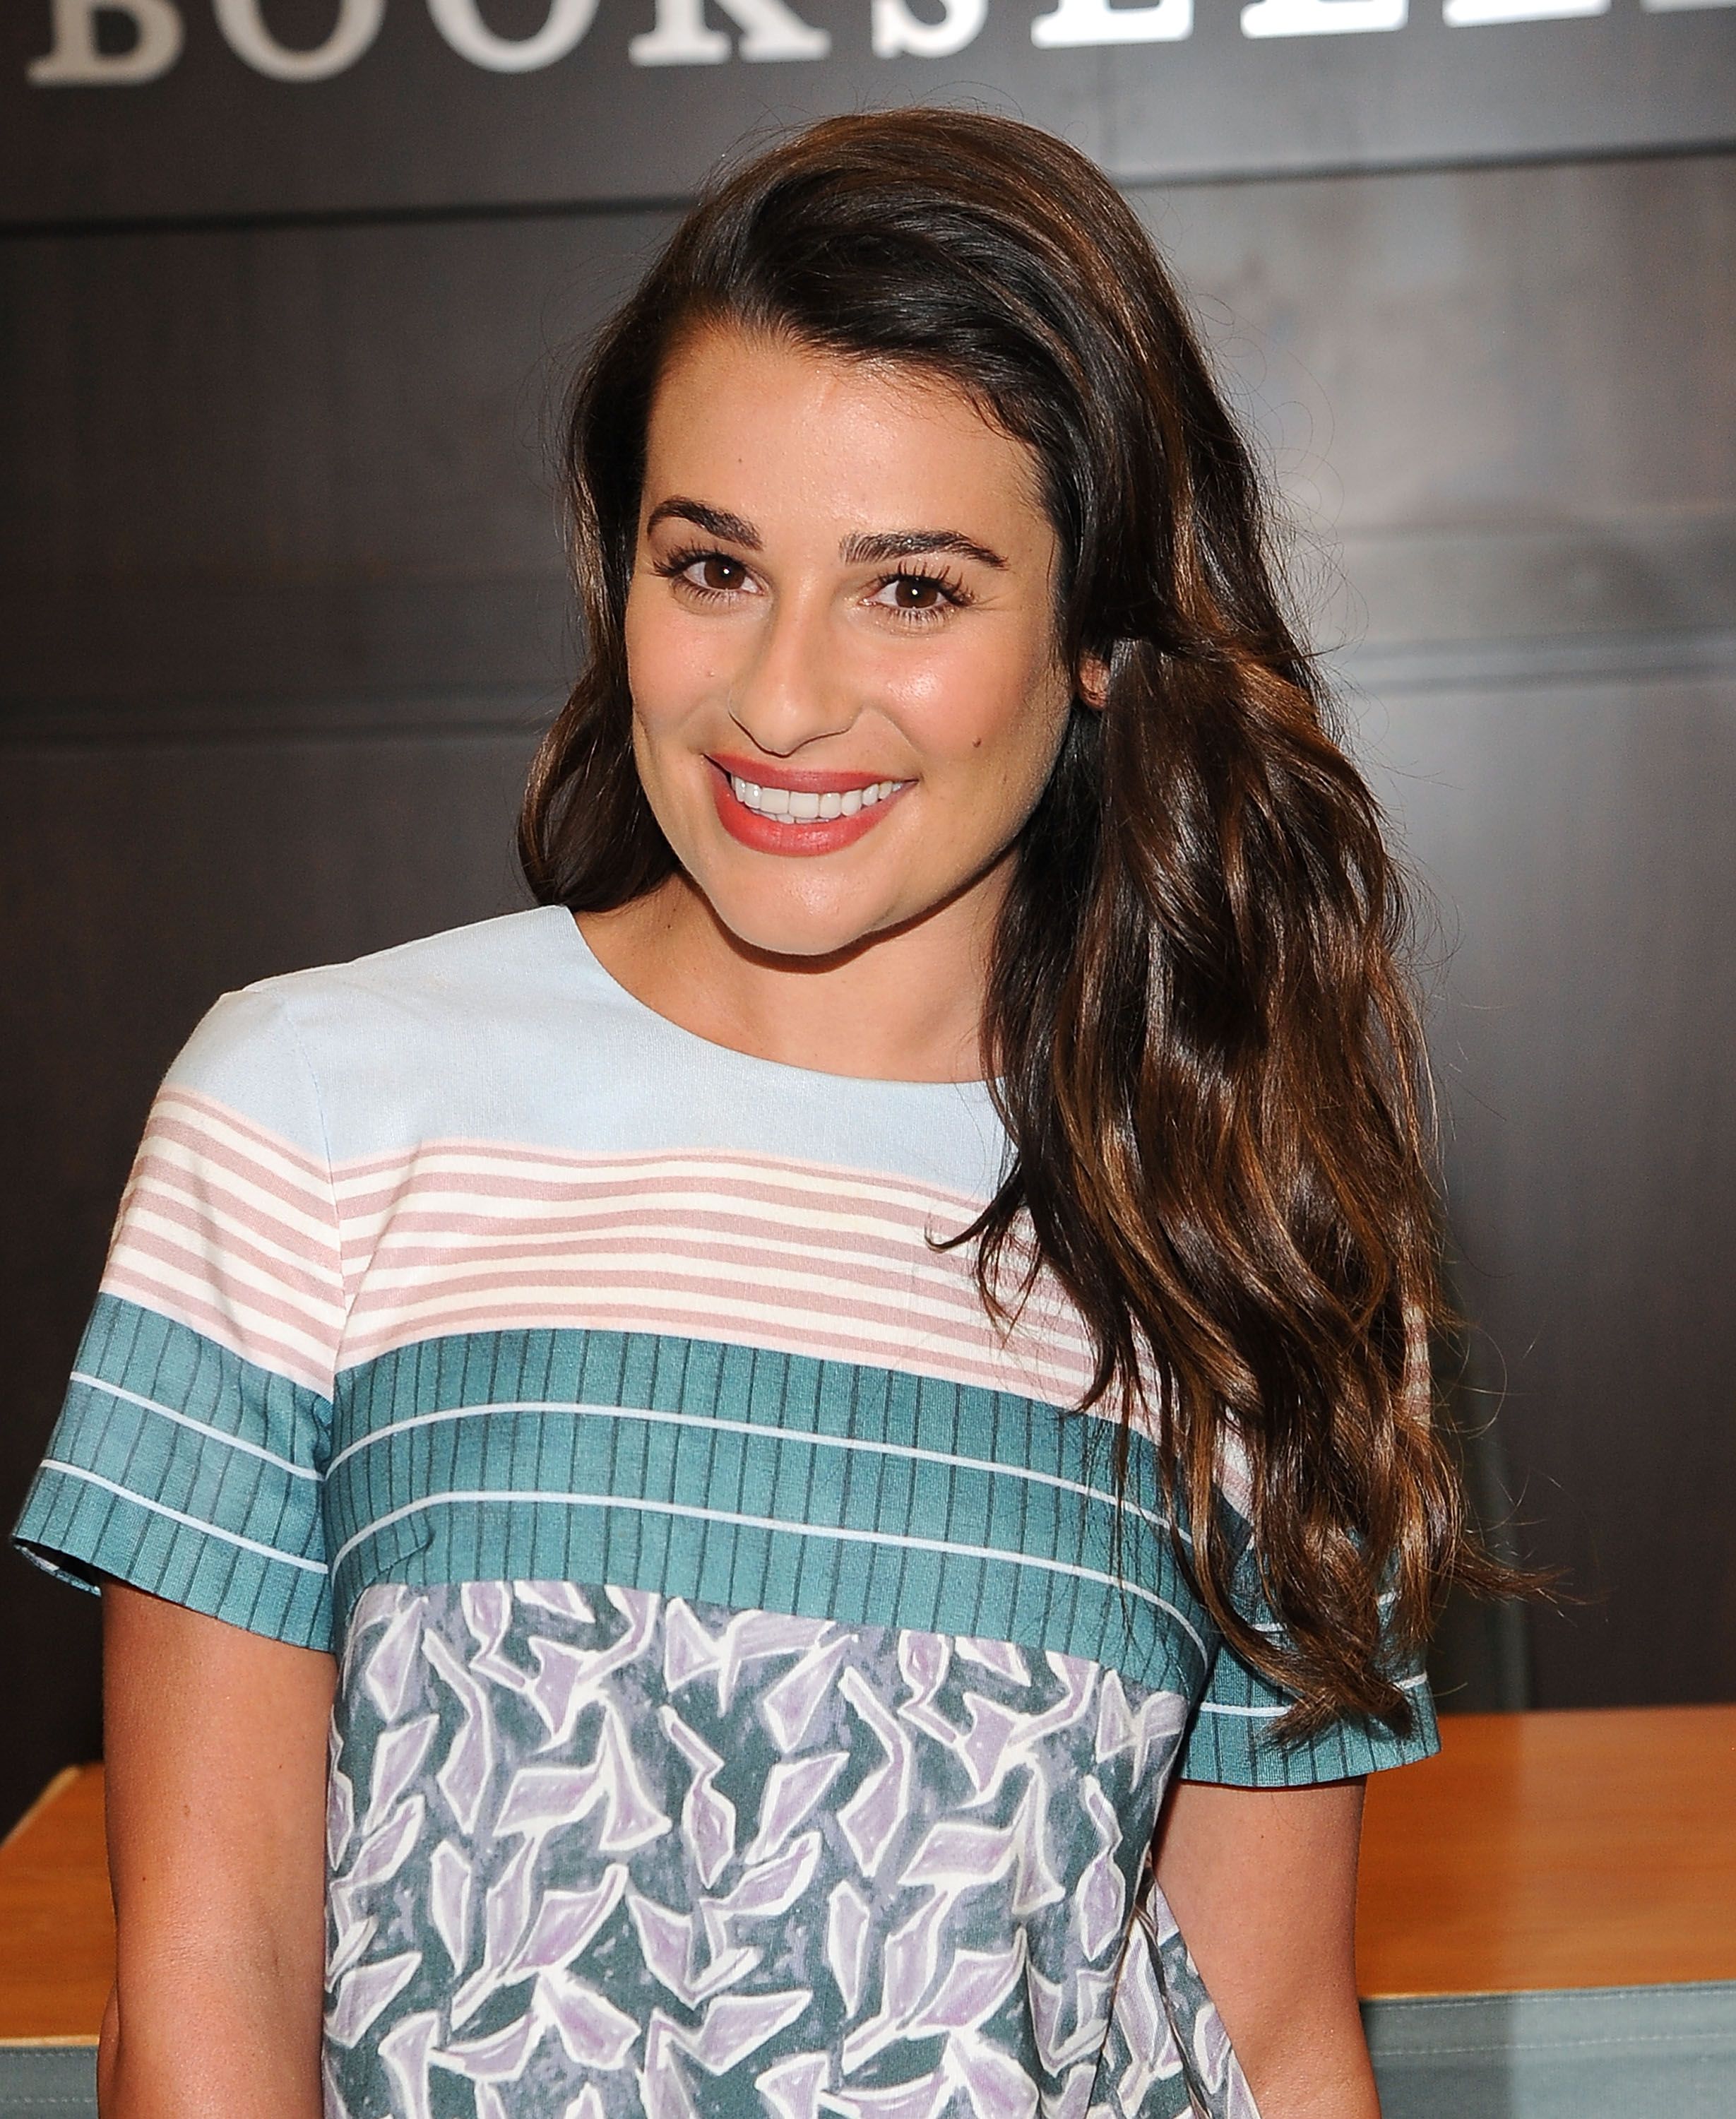 Lea Michele signing copies of her new book "You First: Journal Your Way to Your Best Life" at Barnes & Noble bookstore at The Grove on September 25, 2015 in Los Angeles, California | Photo: Getty Images 